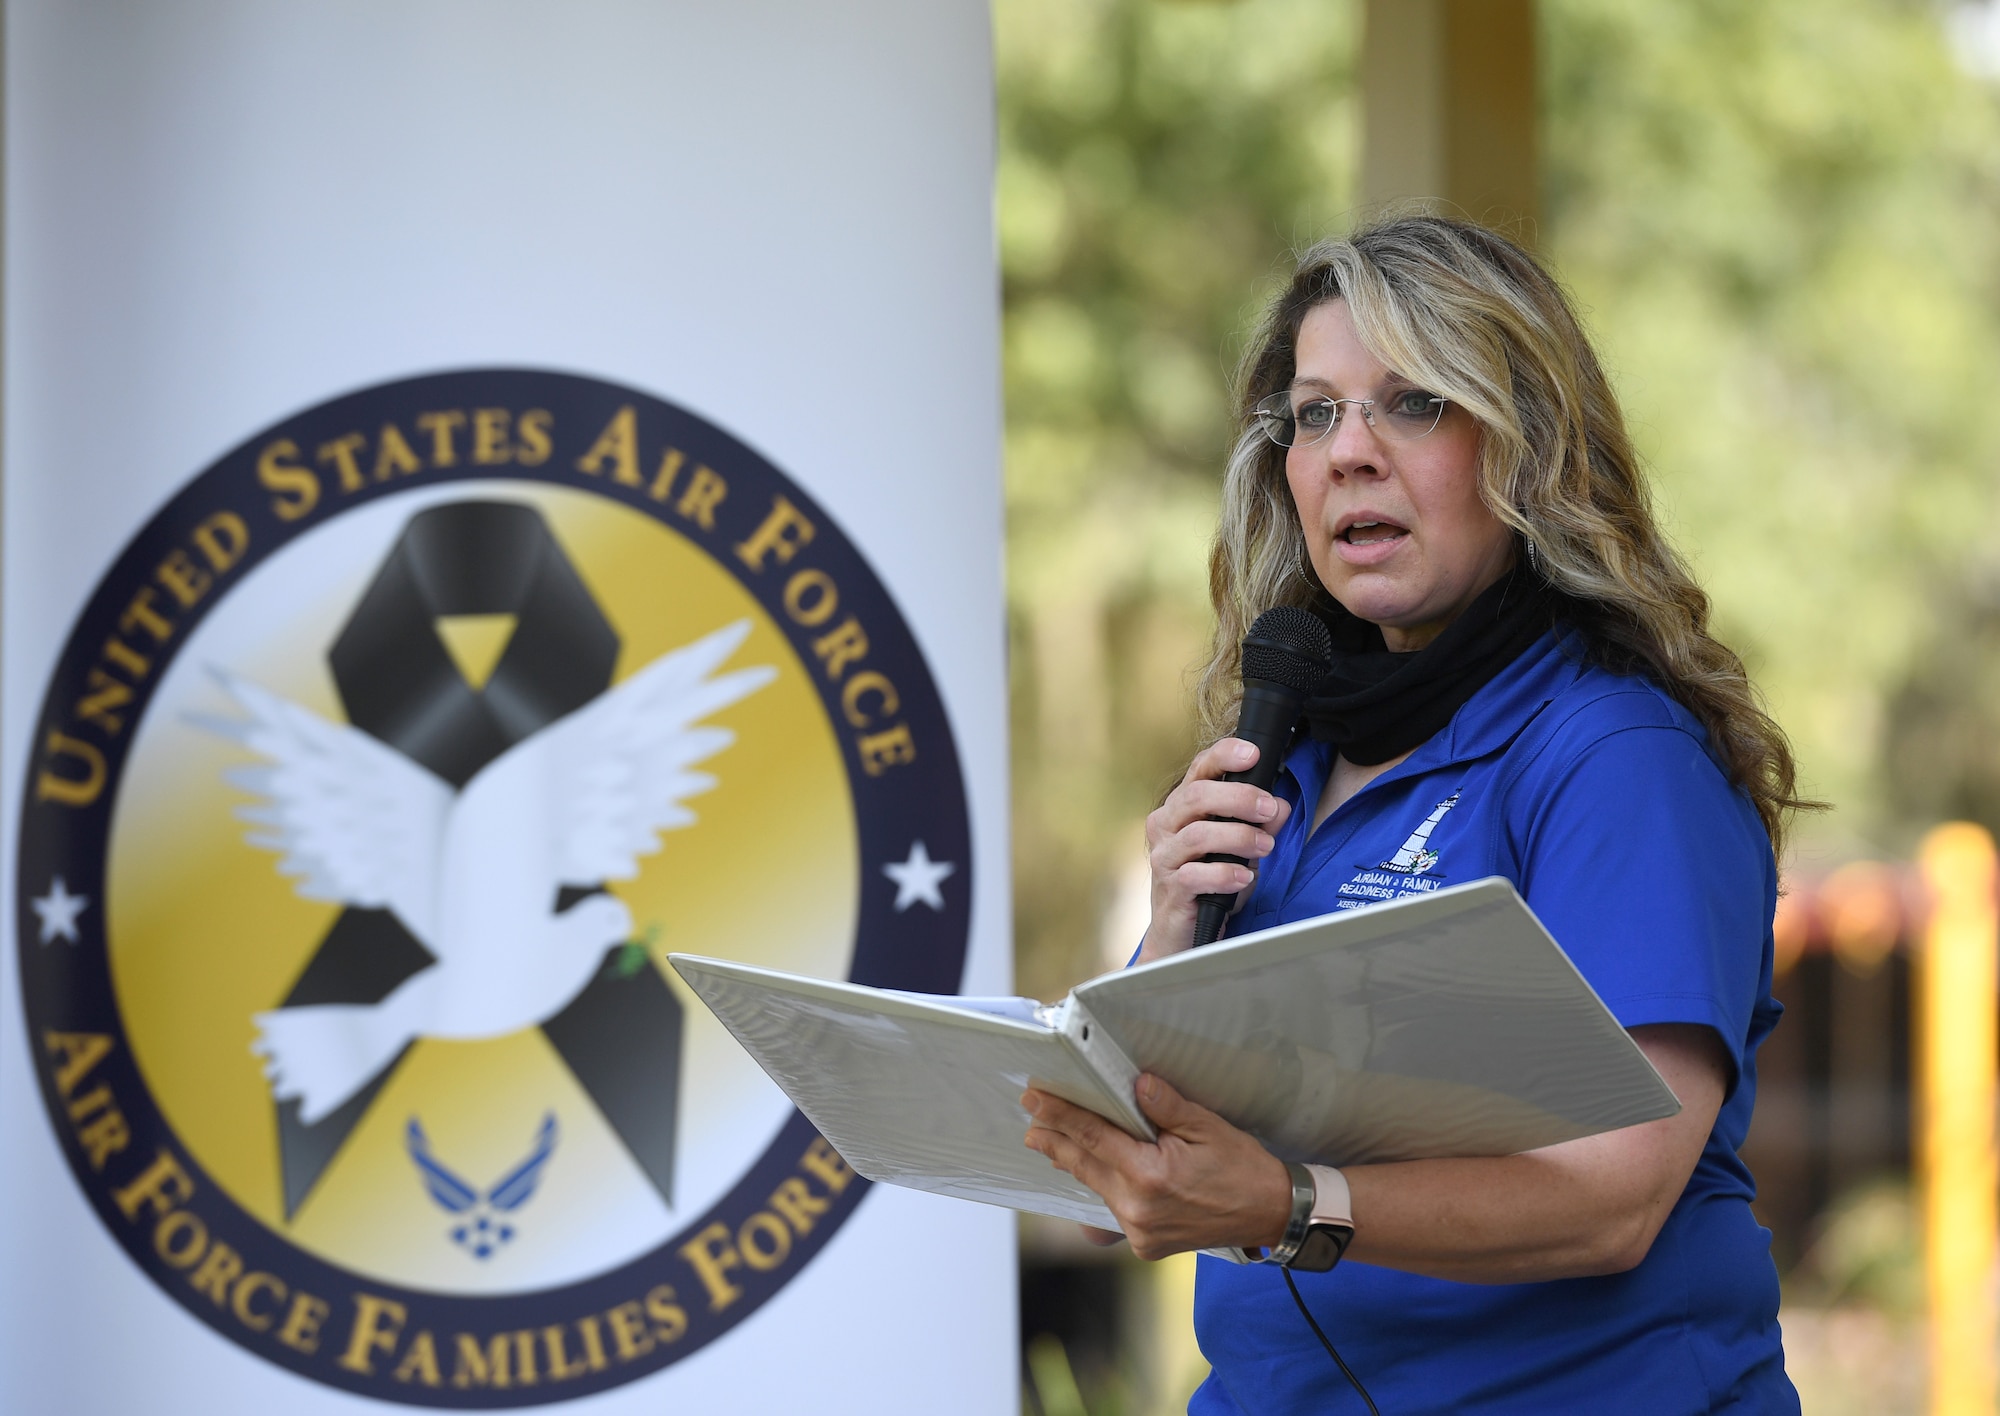 Holly Fisher, 81st Force Support Squadron Air Force Families Forever coordinator, delivers remarks during the Butterfly Release Ceremony honoring Keesler's Fallen Heroes at the Marina at Keesler Air Force Base, Mississippi, Sept. 25, 2020. The event was held in conclusion of Gold Star Family Remembrance Week, which honored the families of fallen service members. (U.S. Air Force photo by Kemberly Groue)